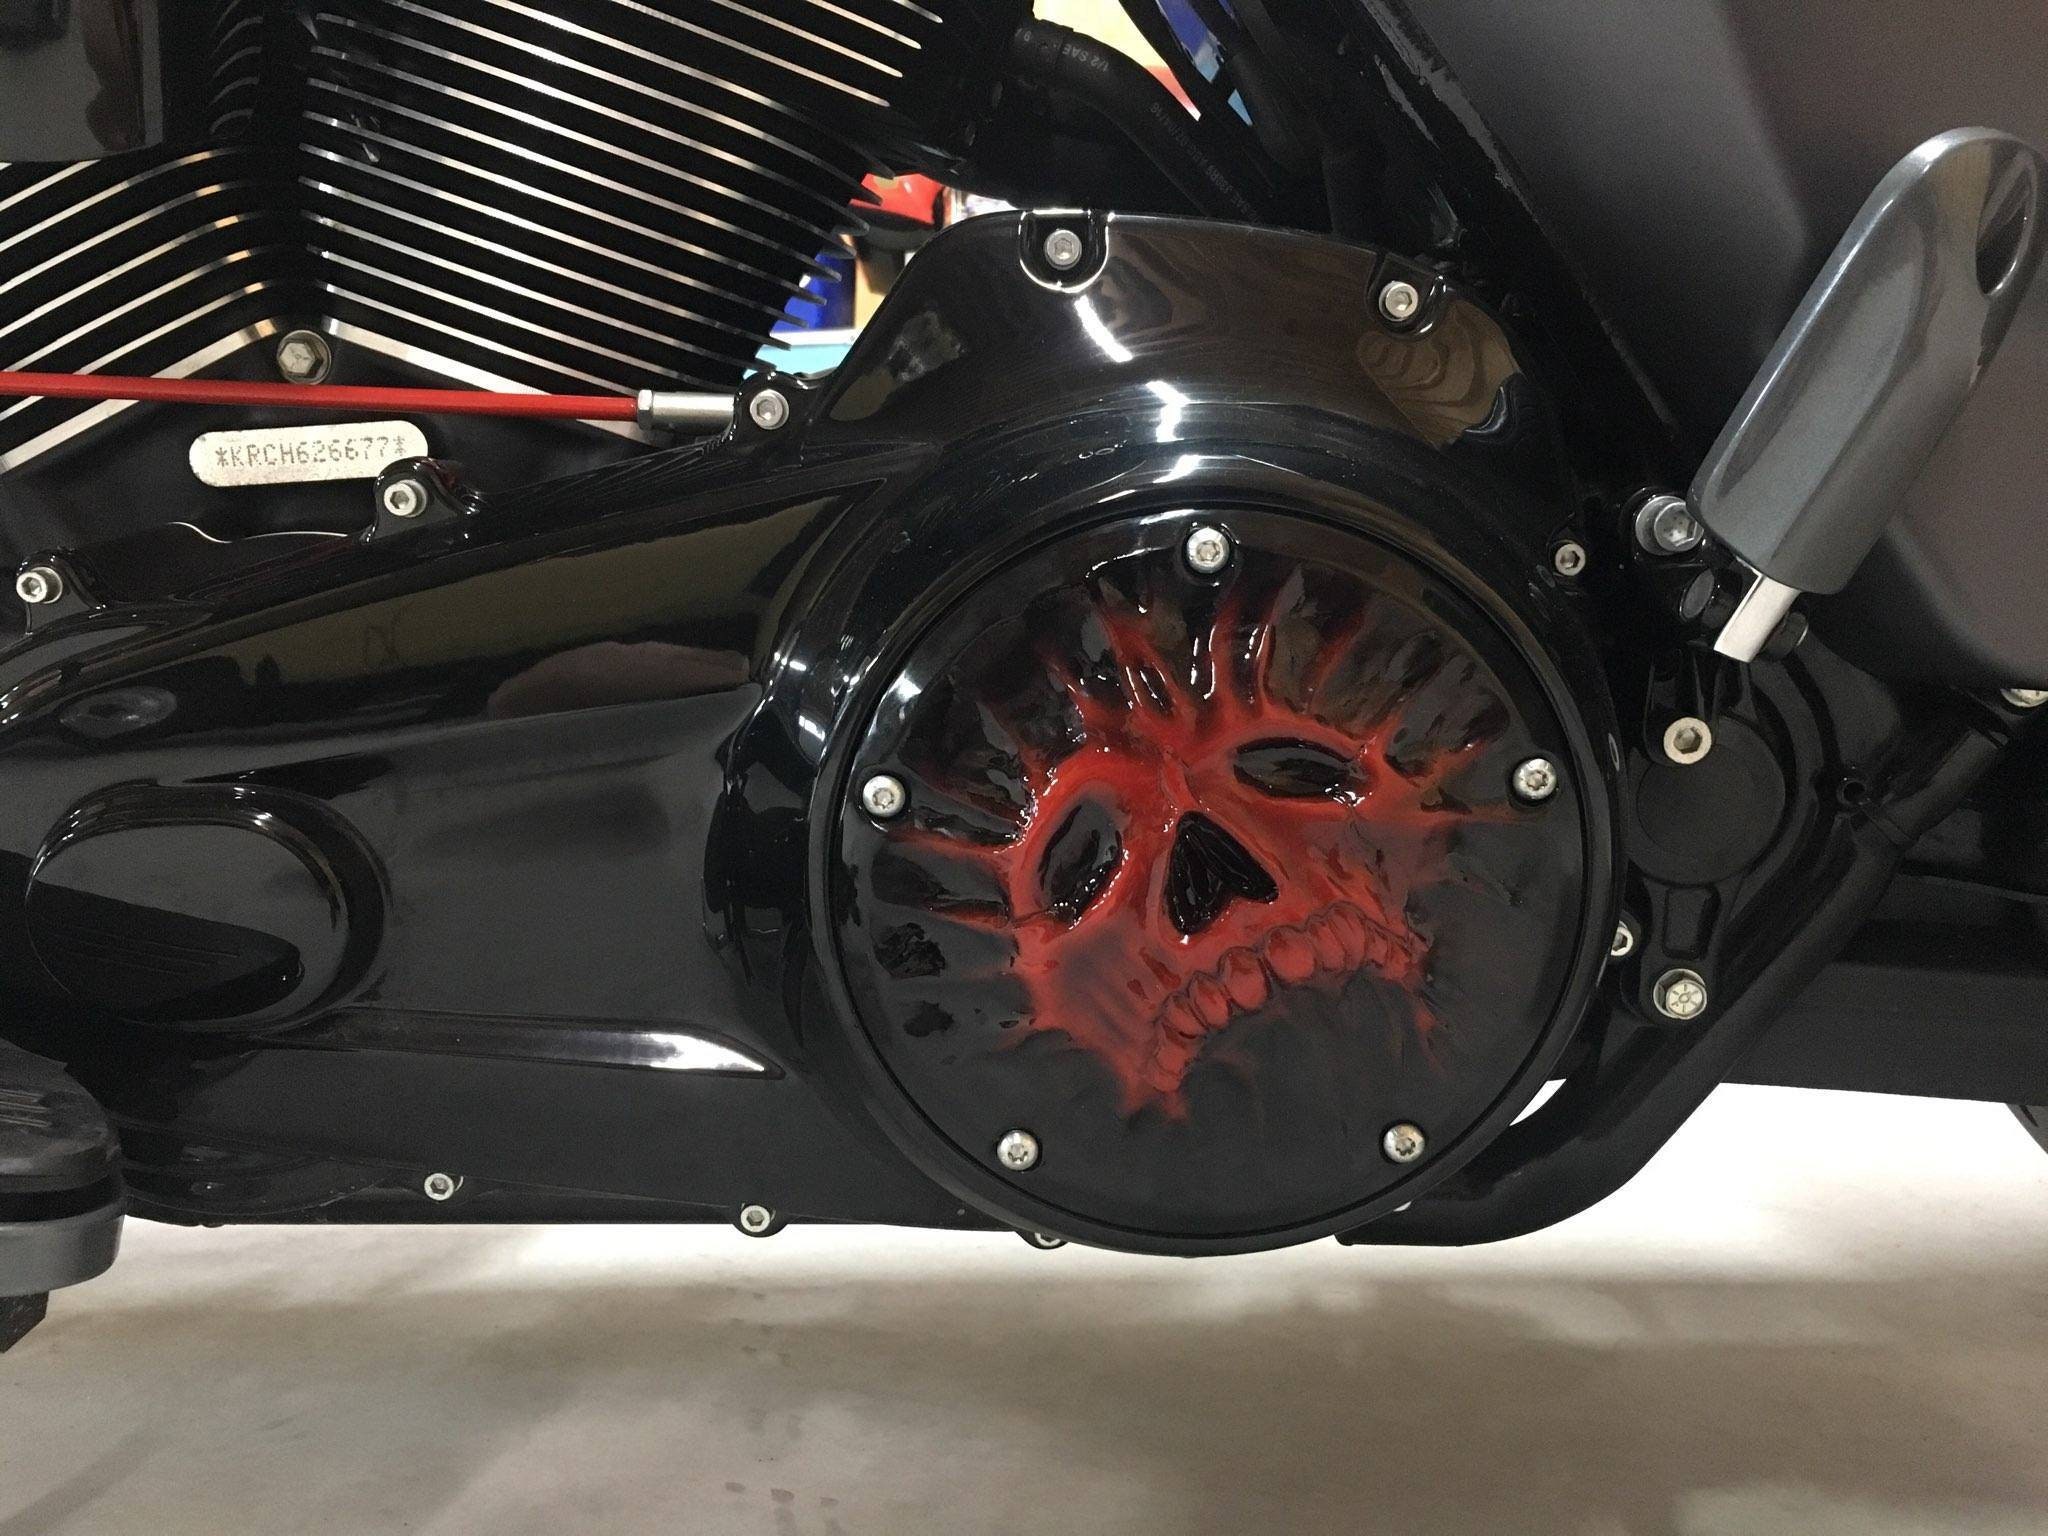 Harley Davidson derby clutch cover with 3D red skull